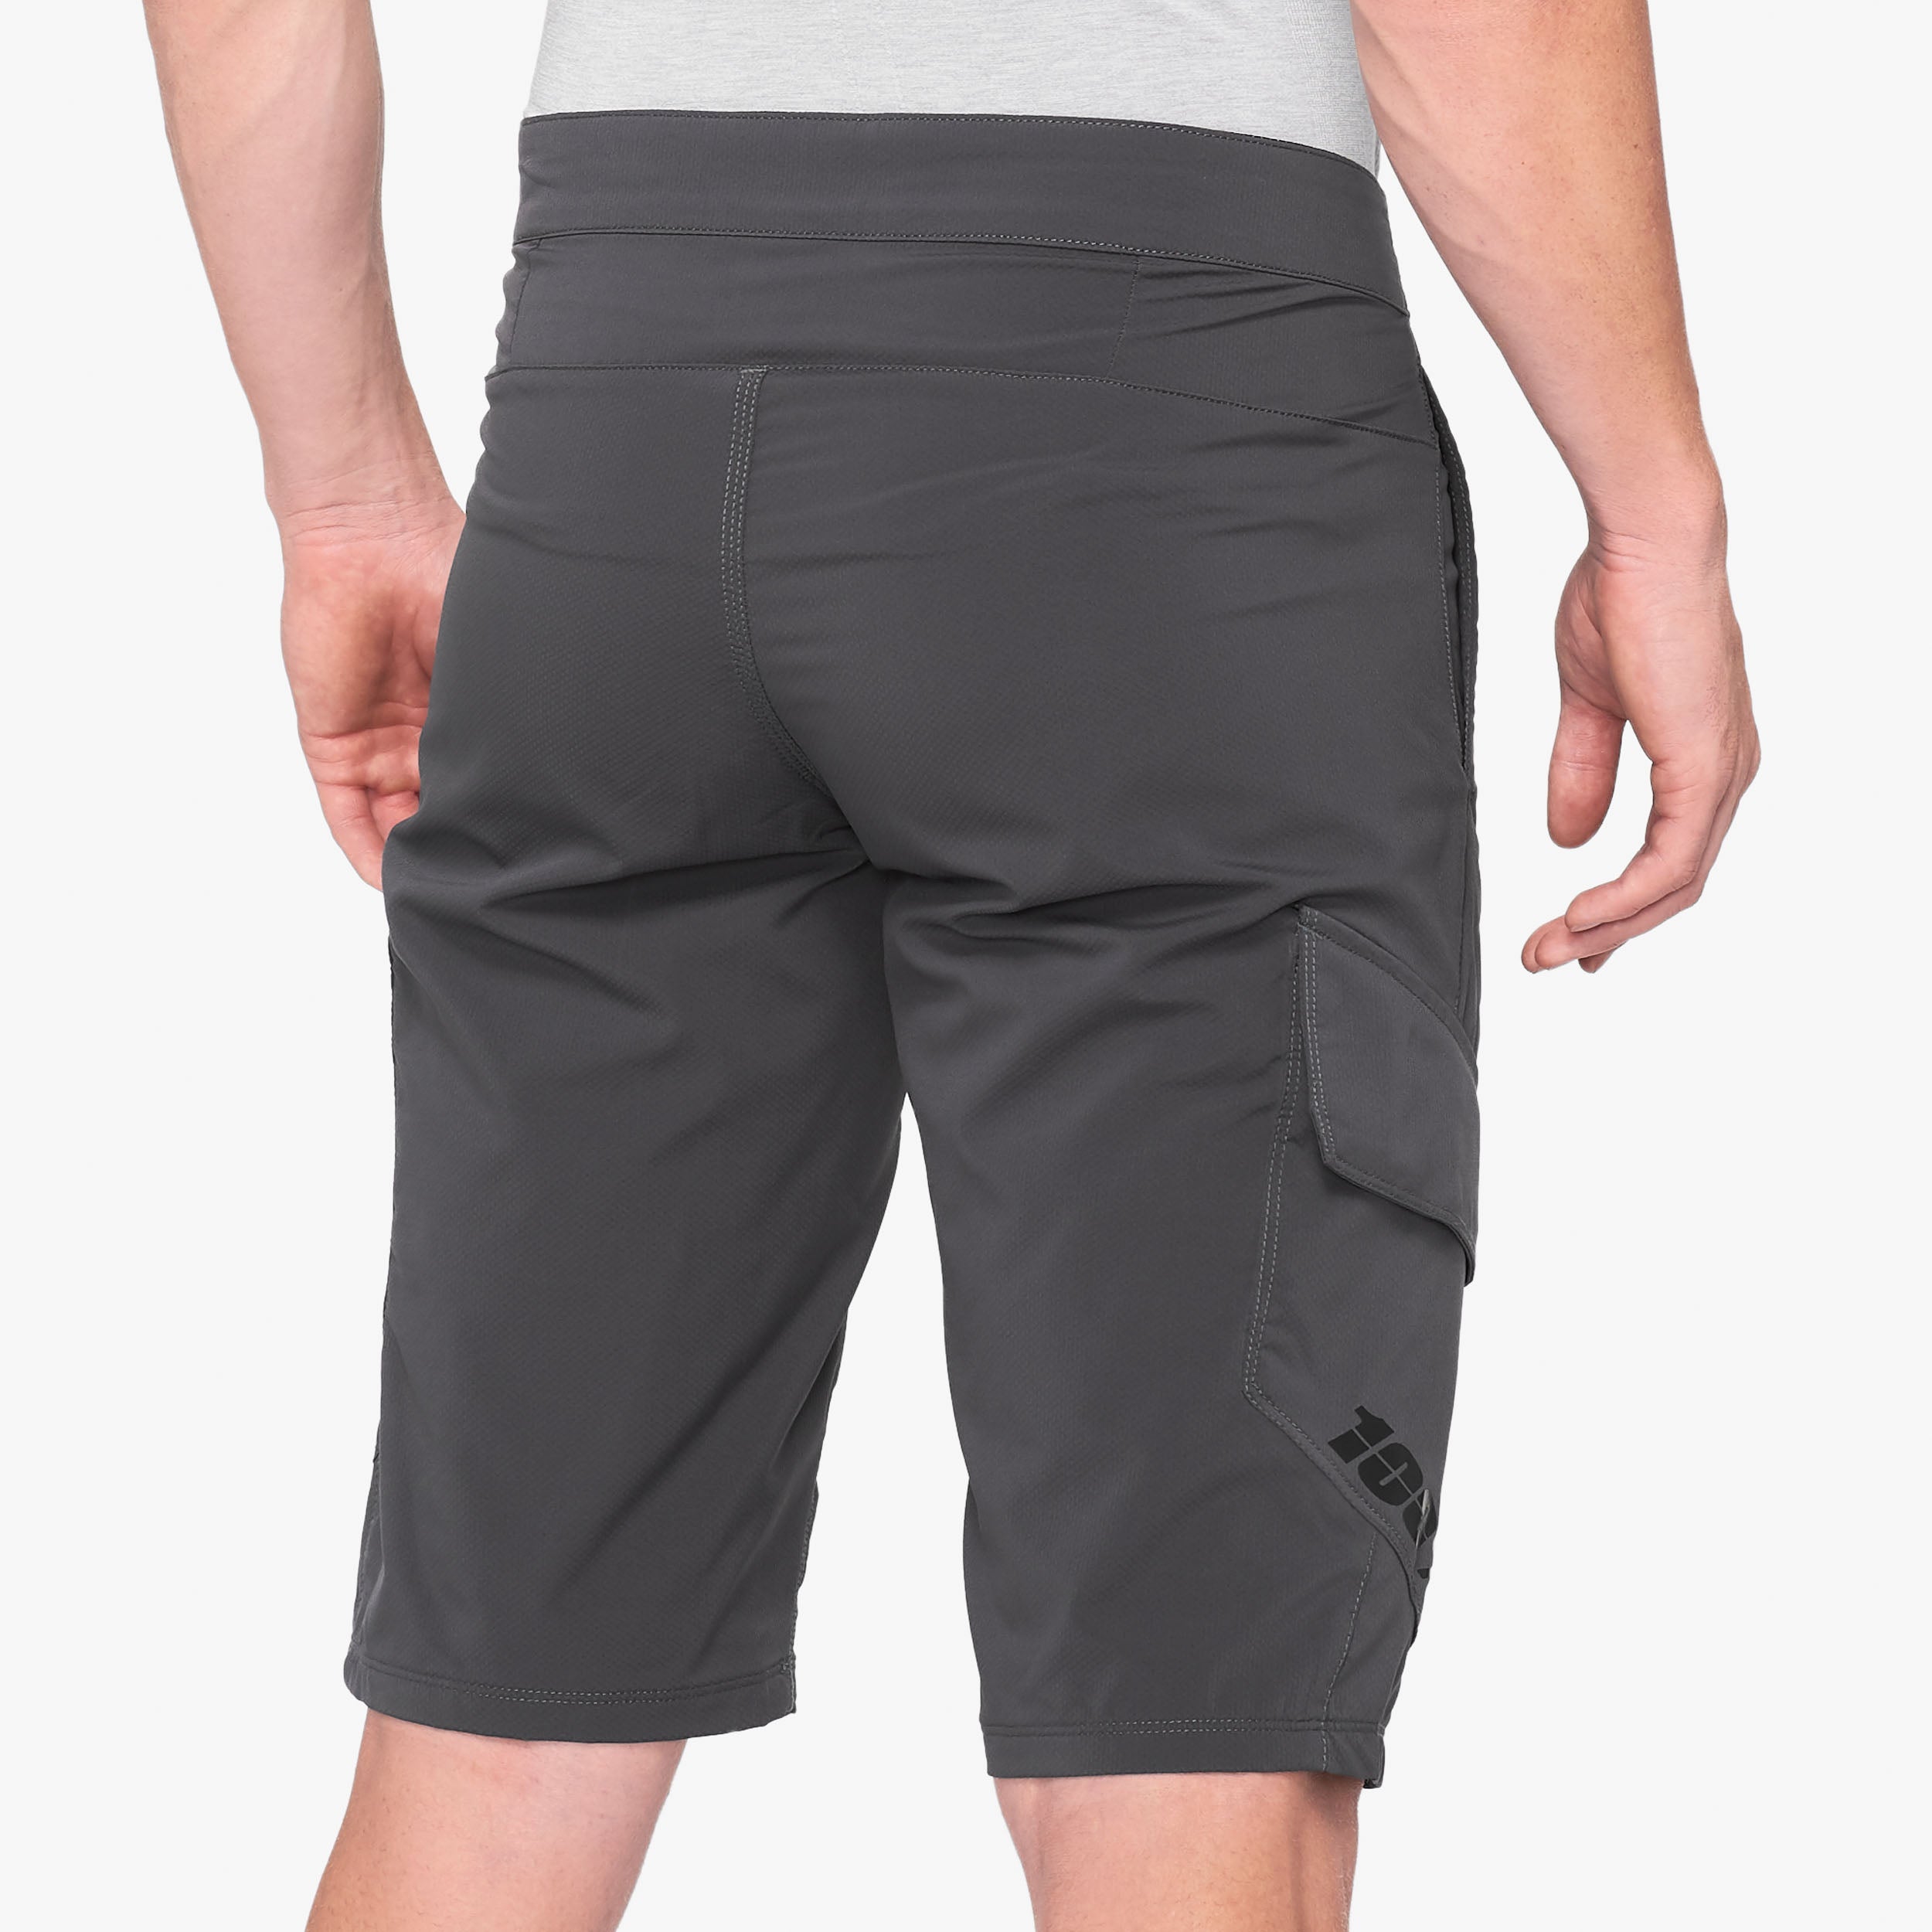 RIDECAMP Shorts - Charcoal - Secondary